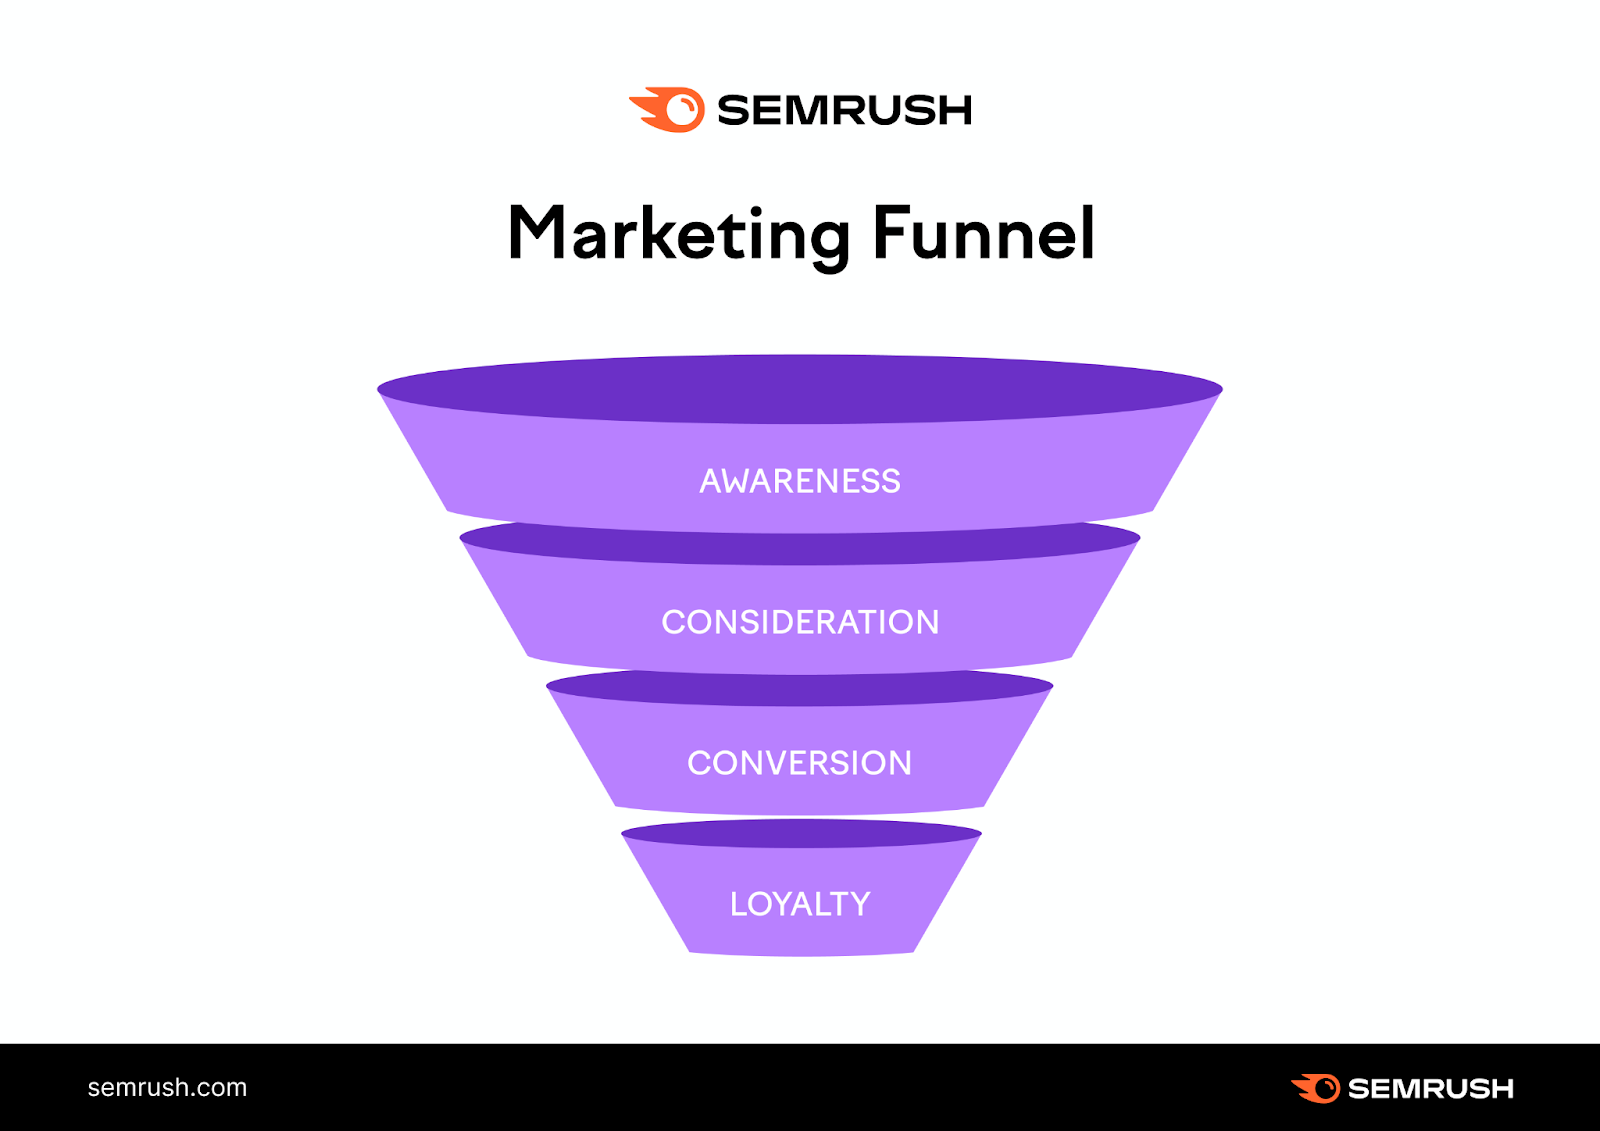 Semrush Marketing Funnel. At the top, in the widest part, is Awareness, narrowing down to consideration, conversion and loyalty at the thinnest point.